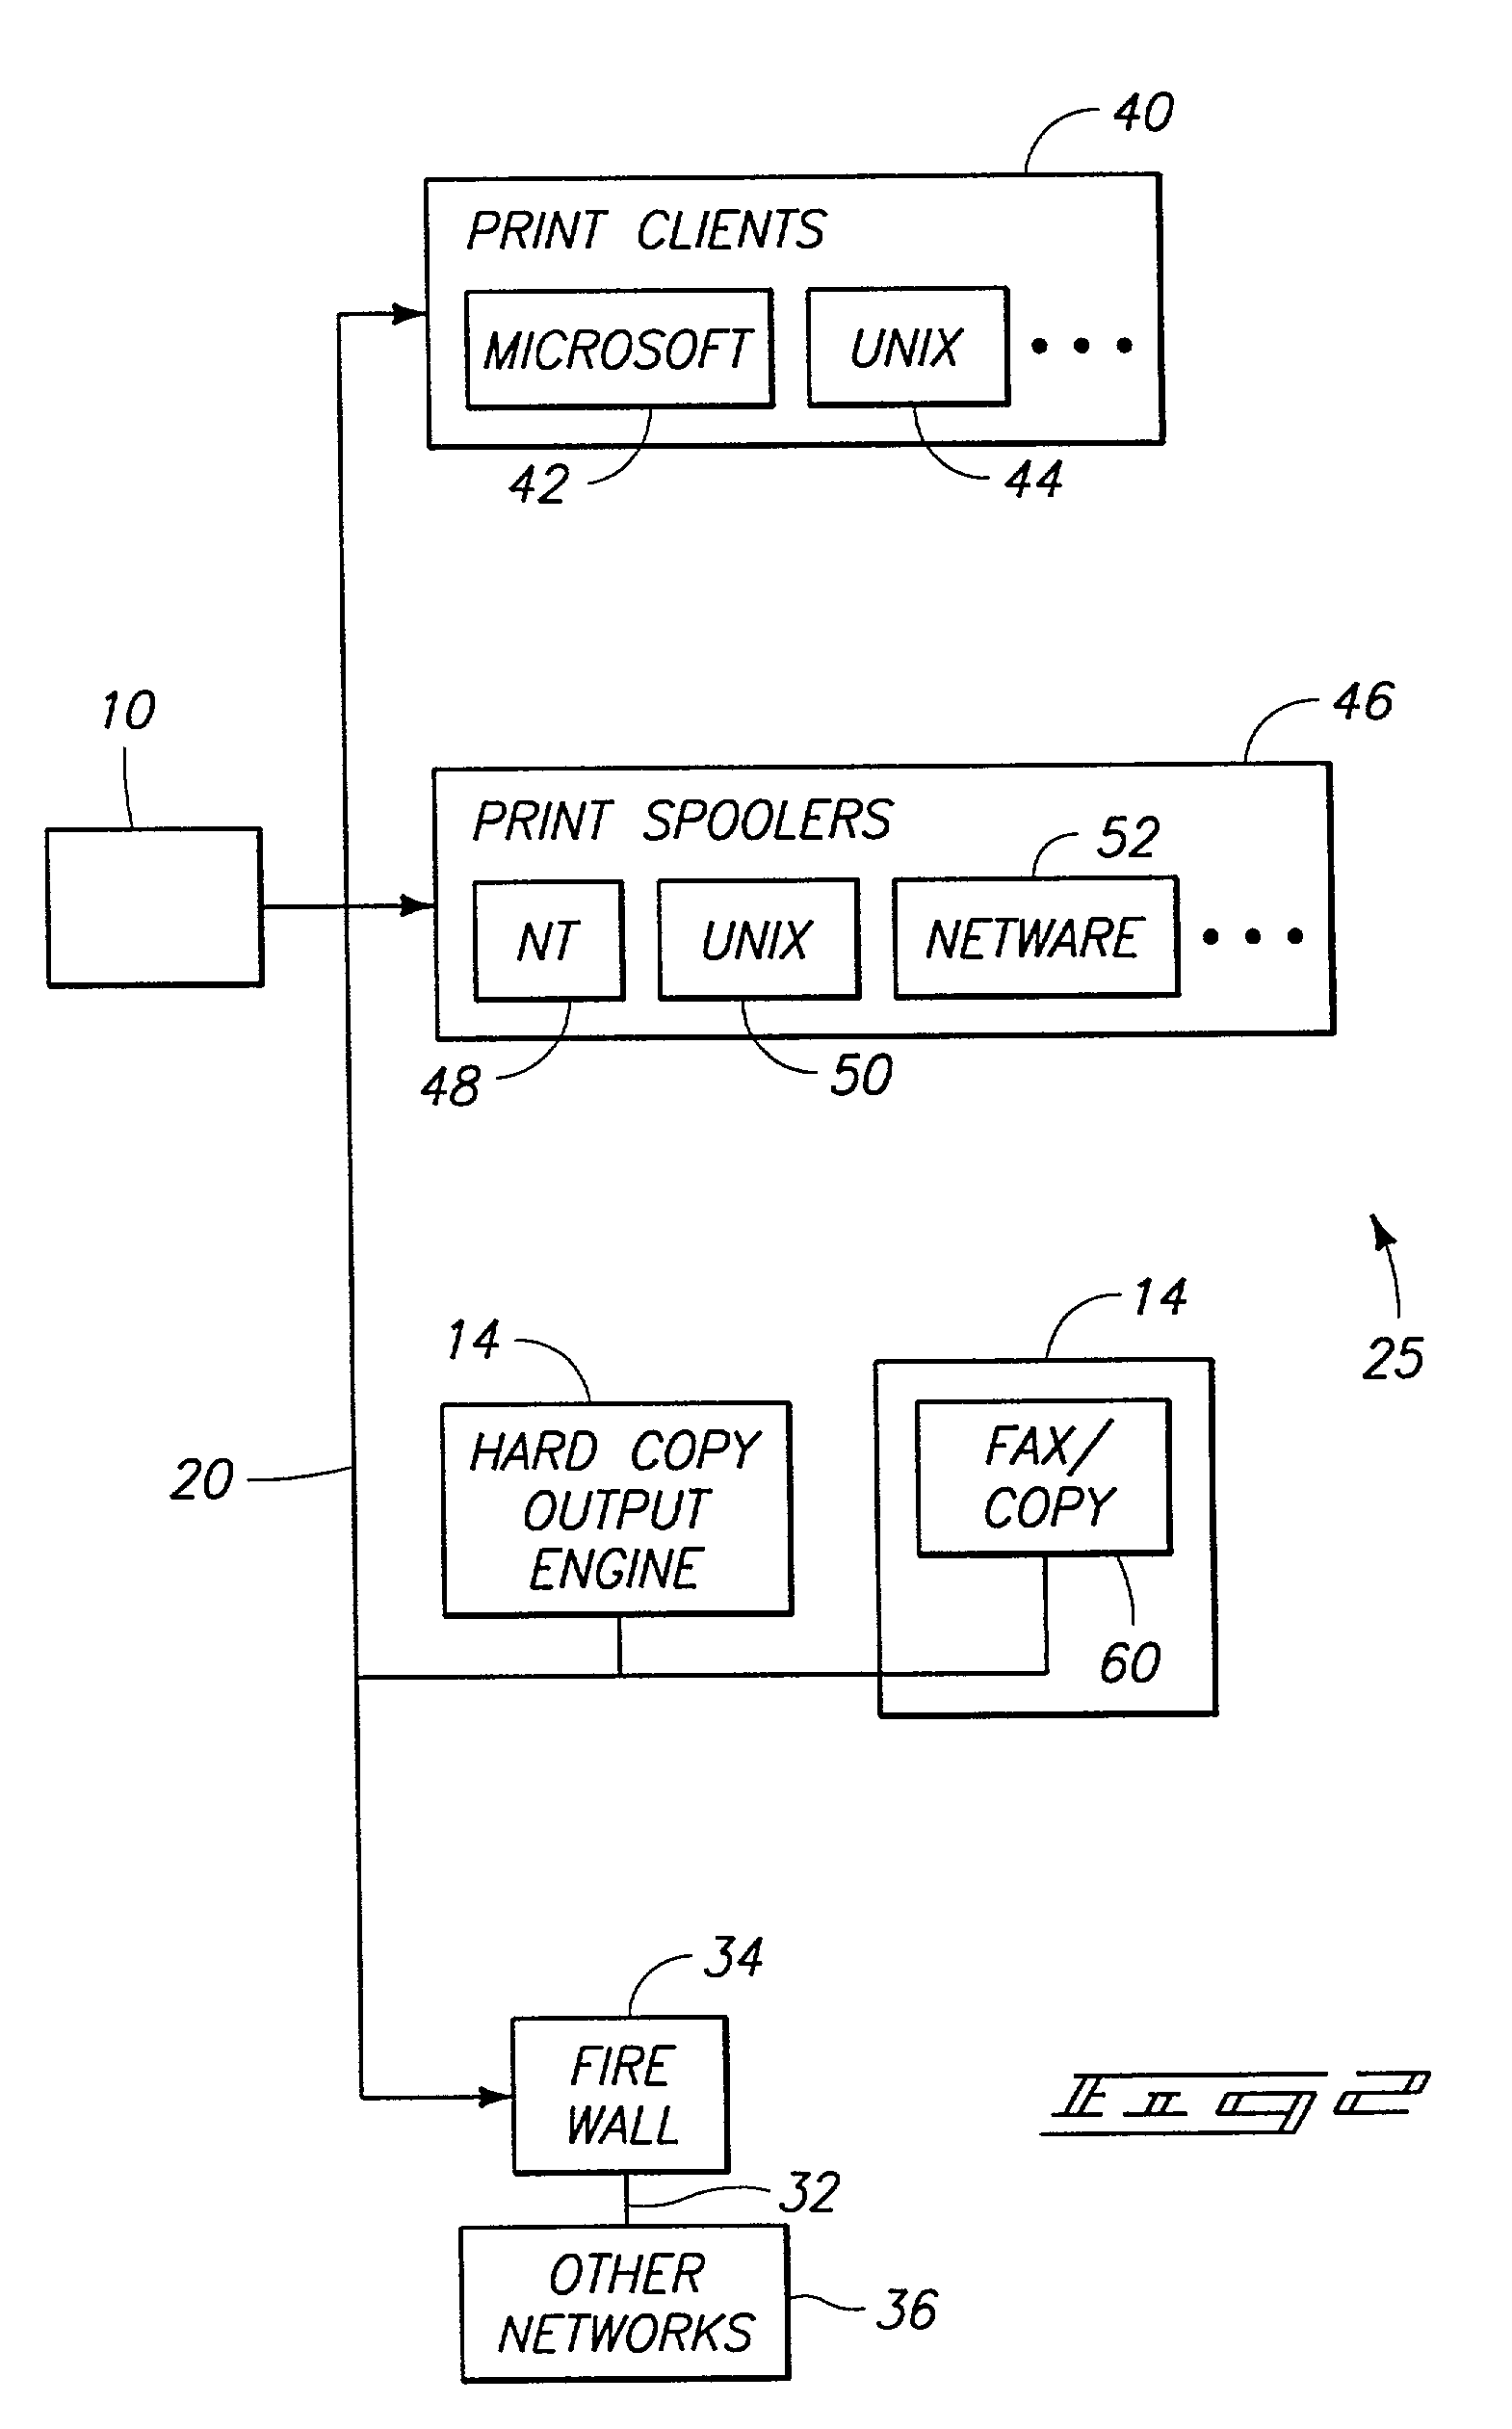 Reorder assistance notification of near end-of-life consumables and method